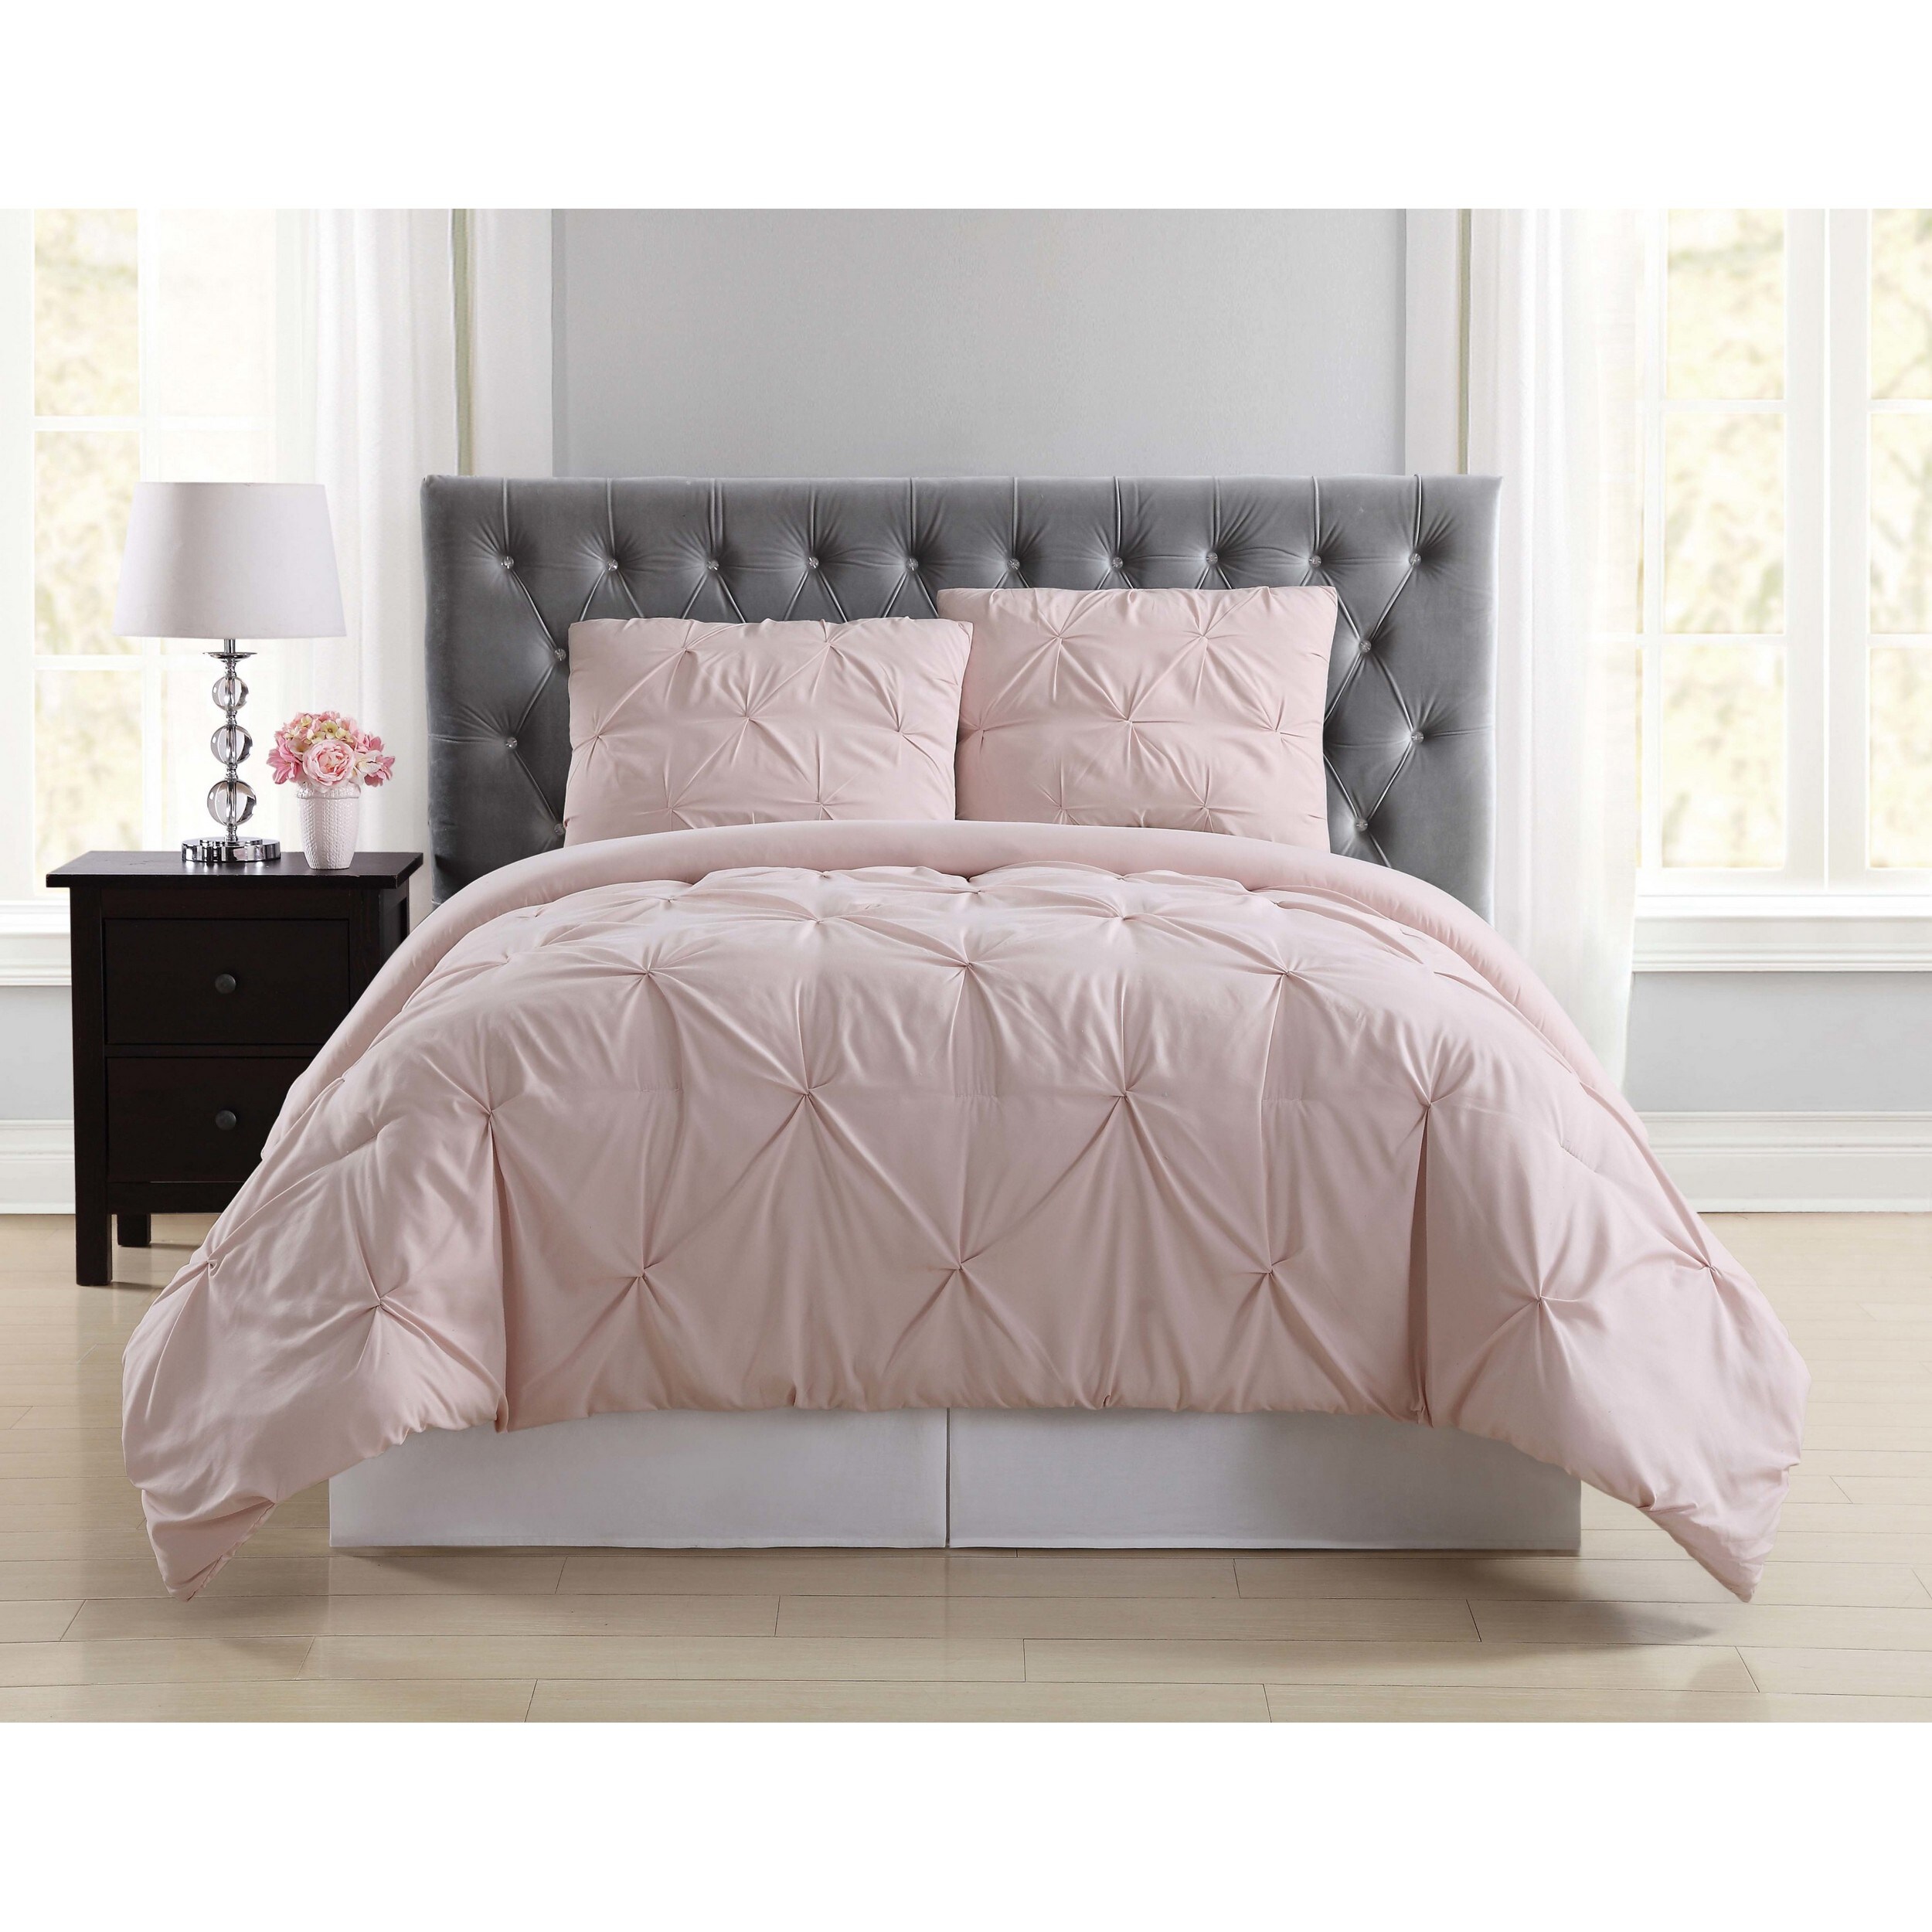 Tufted Twin Comforter Set (68x90 inches), 2 Pieces- Soft Cotton